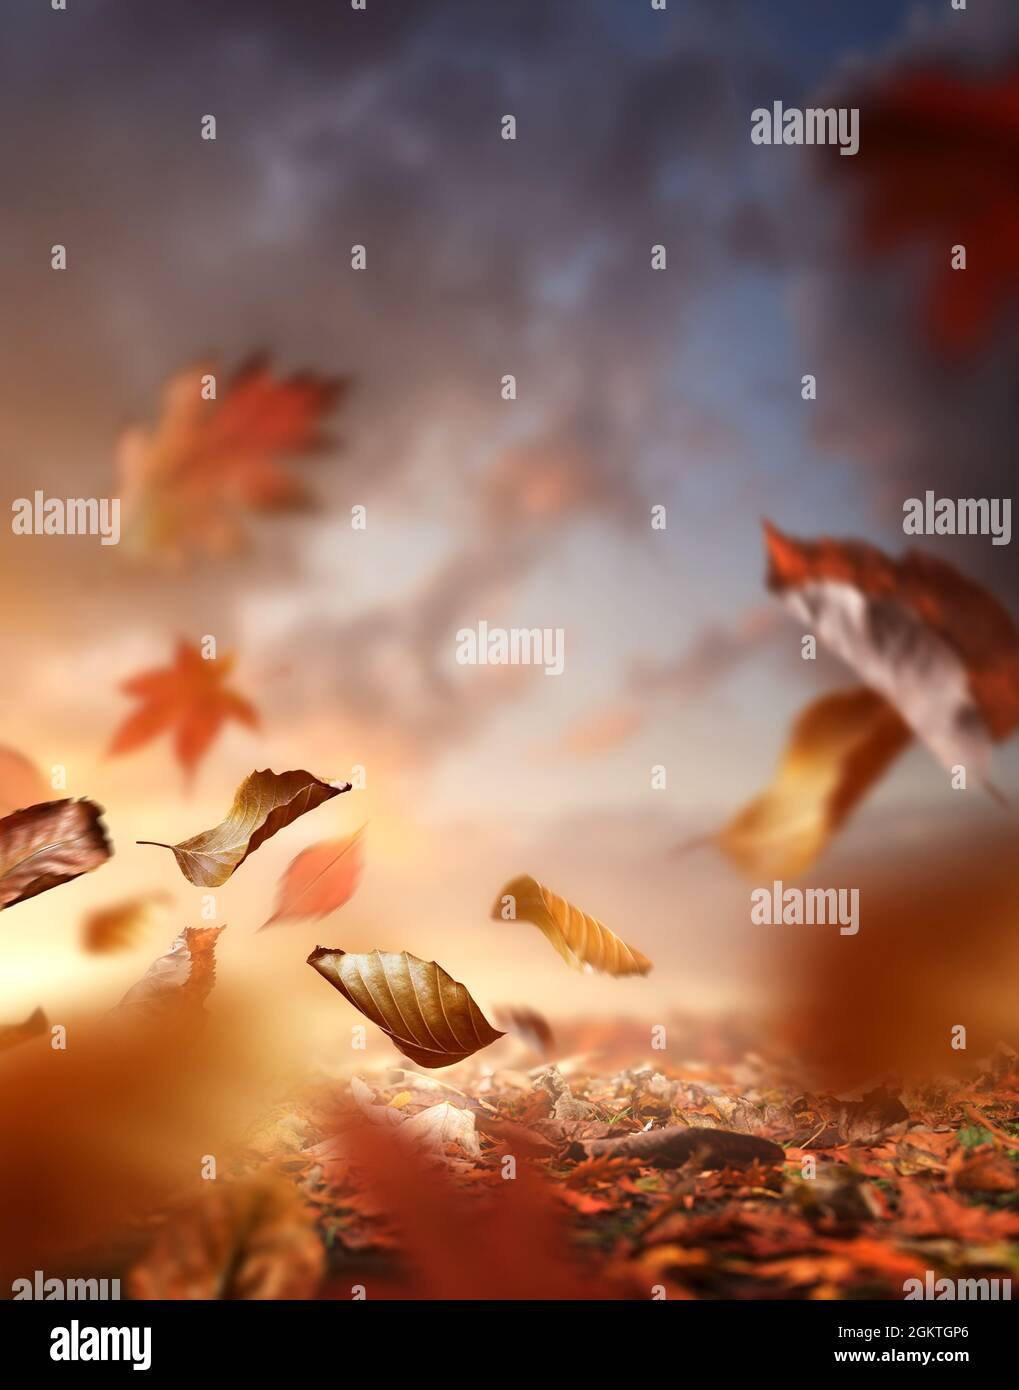 Fall season. Autumn background with the ground covered in leaves and the wind blowing them up into the air. Stock Photo